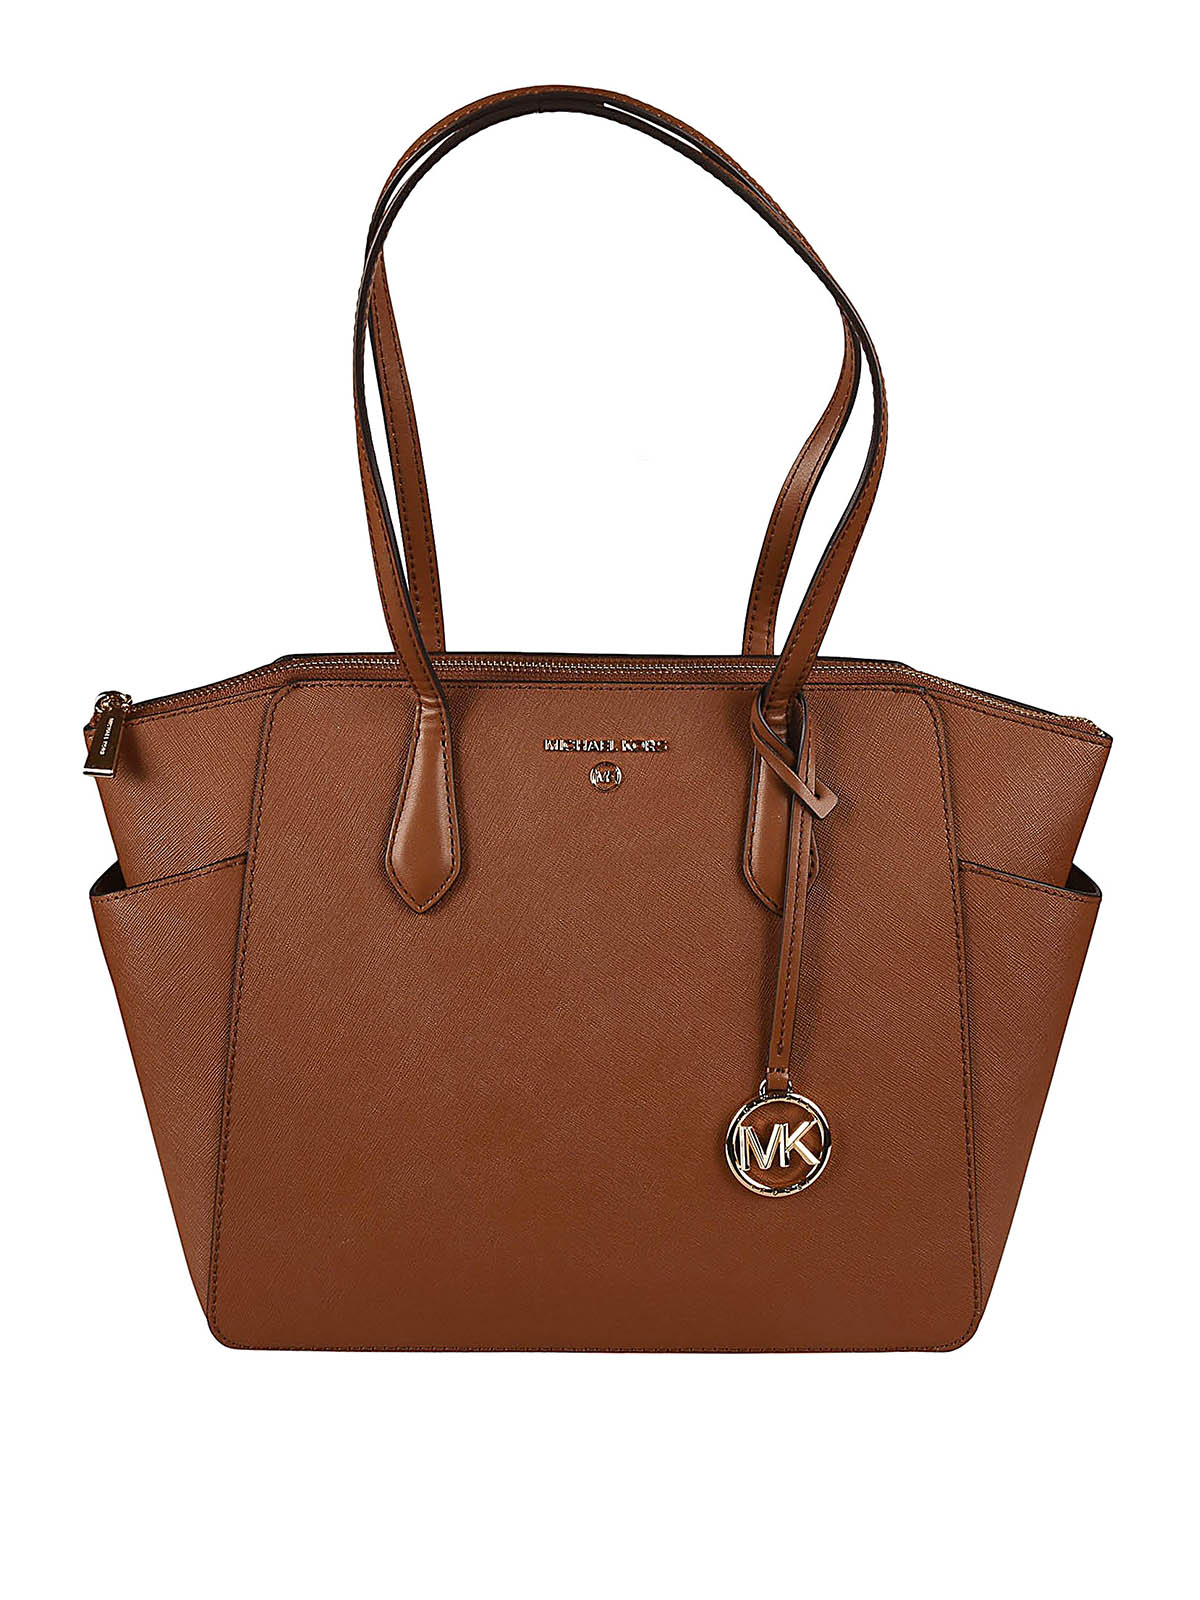 Michael Kors Marilyn Saffiano Leather Tote Bag In Marrón Claro